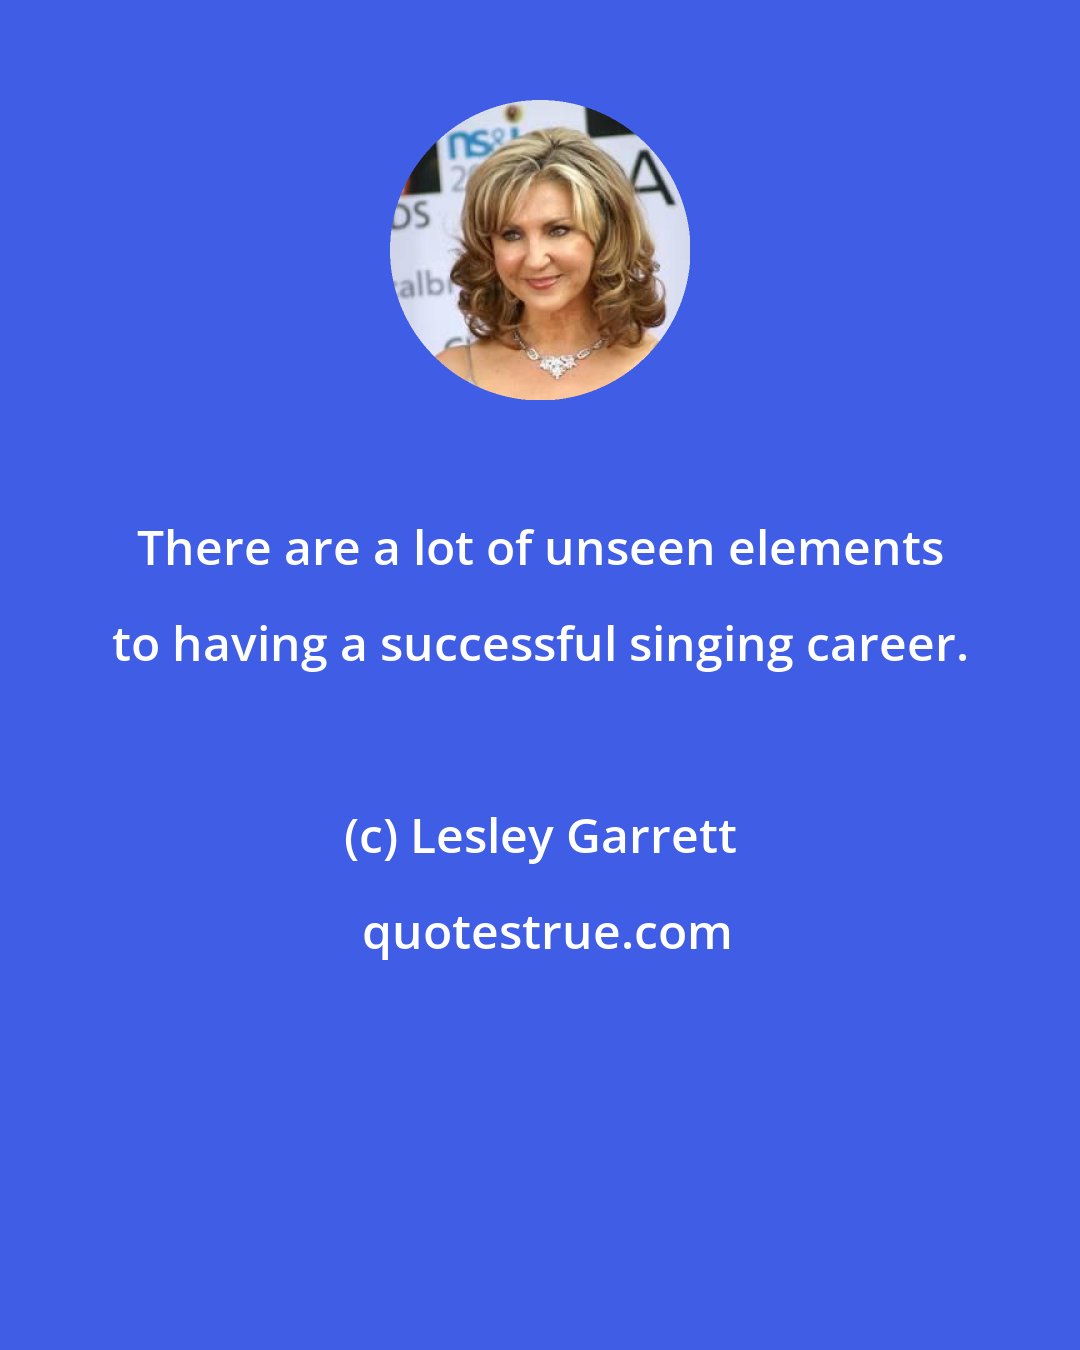 Lesley Garrett: There are a lot of unseen elements to having a successful singing career.